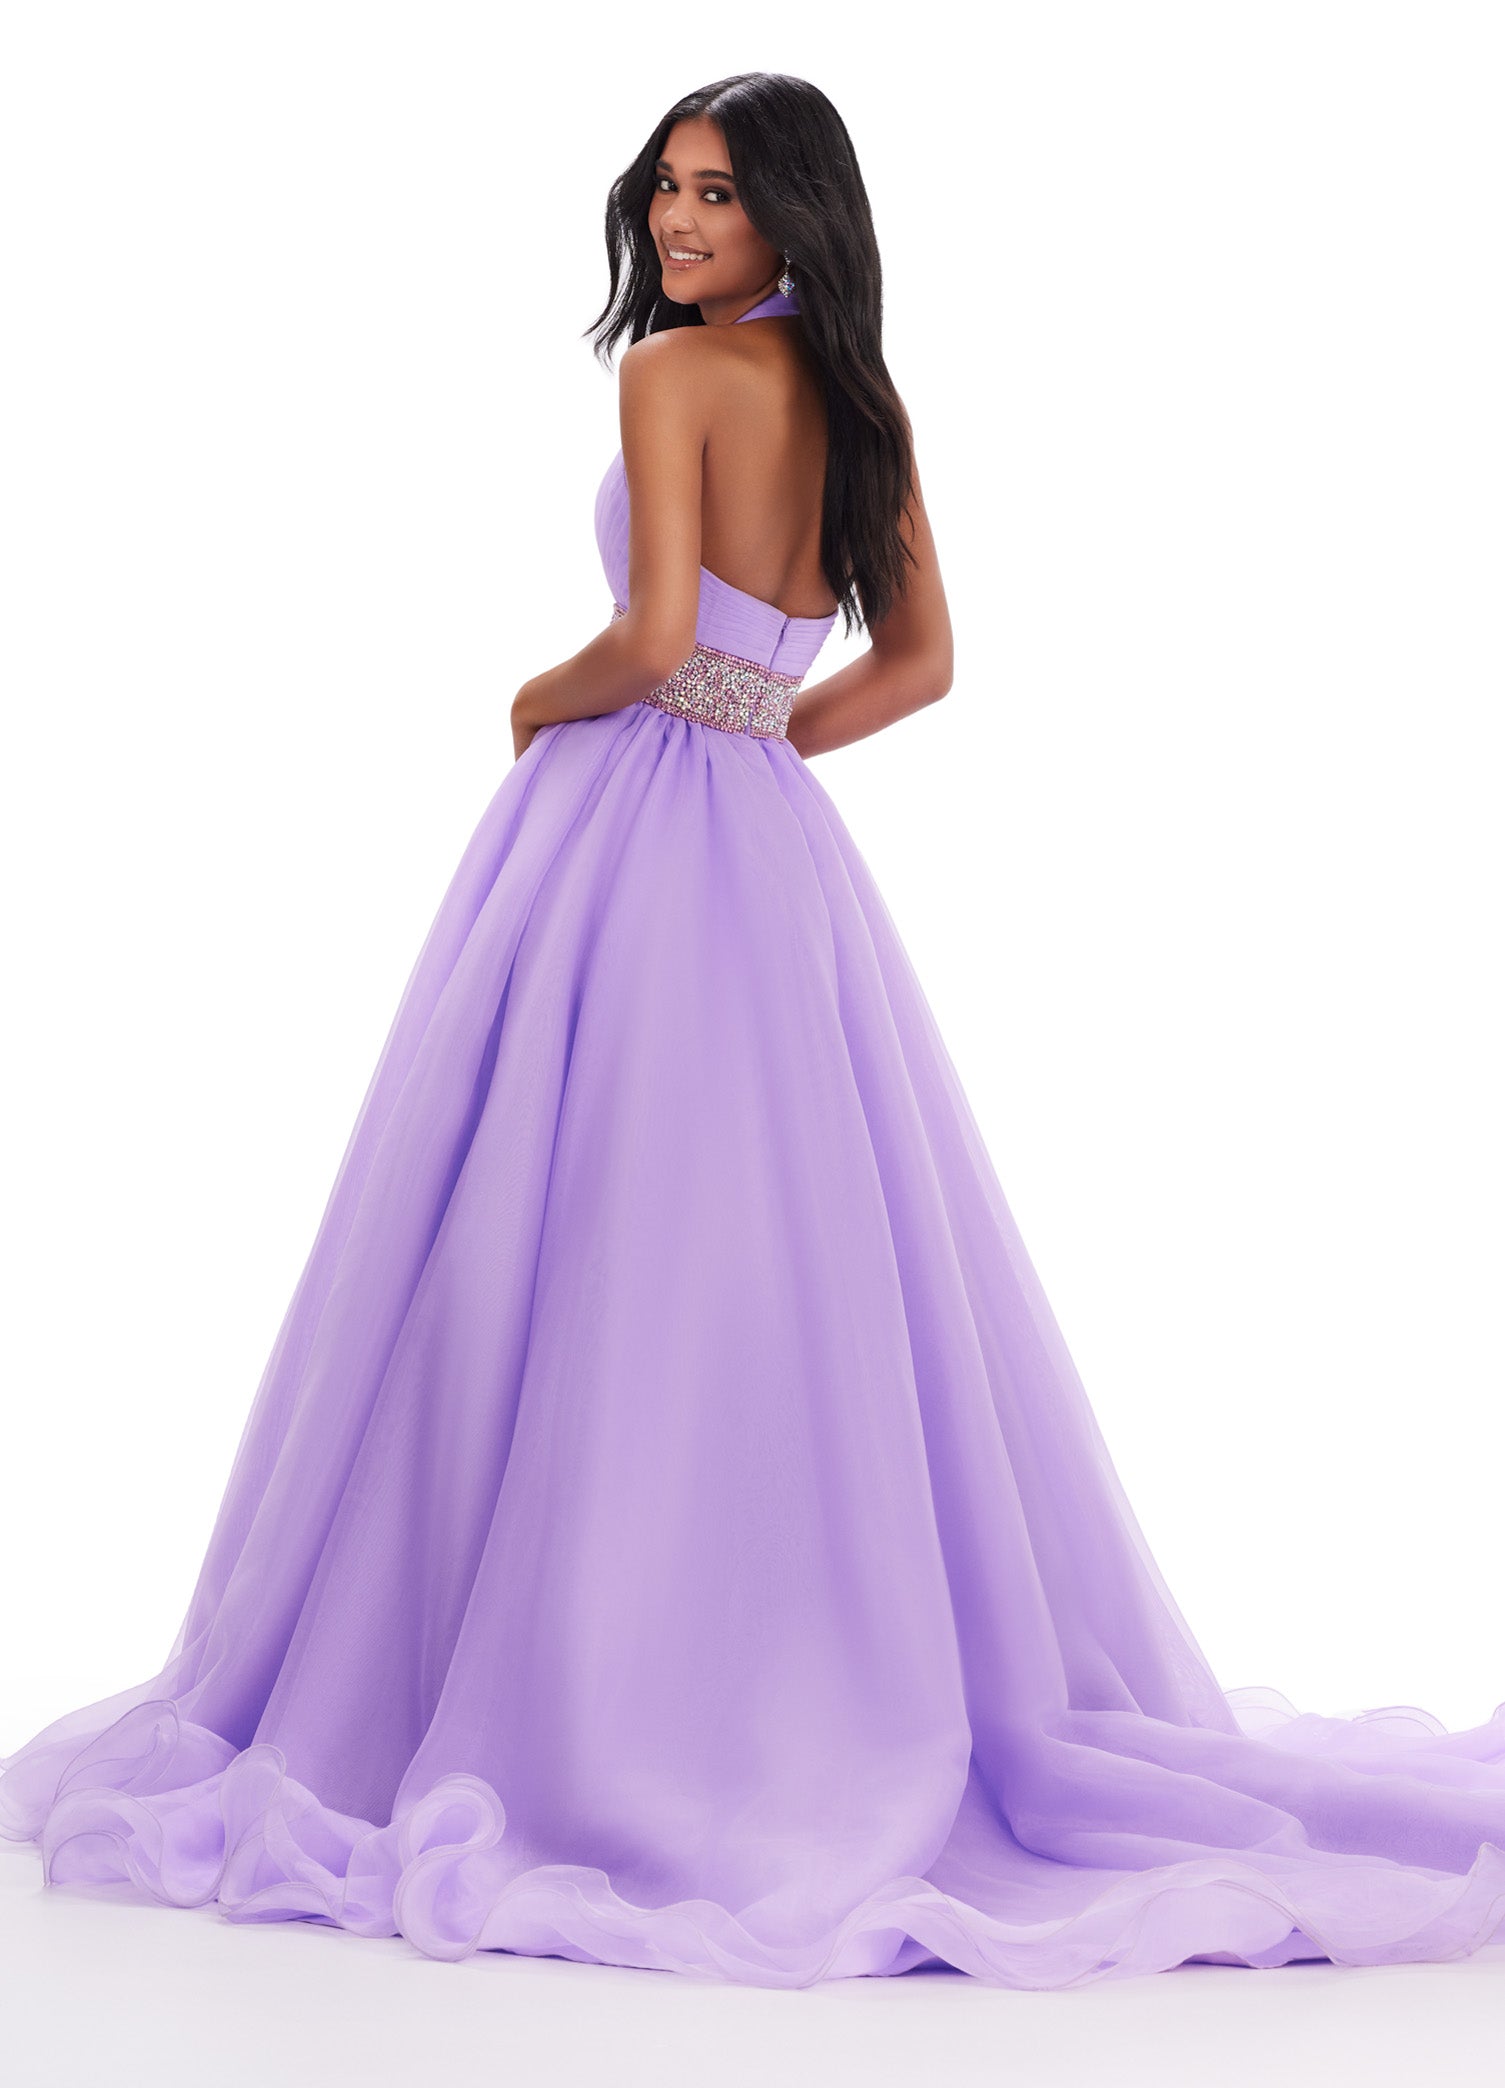 Expertly designed by Ashley Lauren, this formal pageant gown features a beautiful organza ball gown and a stunning beaded belt. Its delicate fabric and intricate details exude elegance, making it the perfect choice for any special occasion. Stand out and feel confident in this long prom dress. Turn heads in this v-neckline organza ball gown with wide fully encrusted crystal waistline. The look is complete with wire hem details.